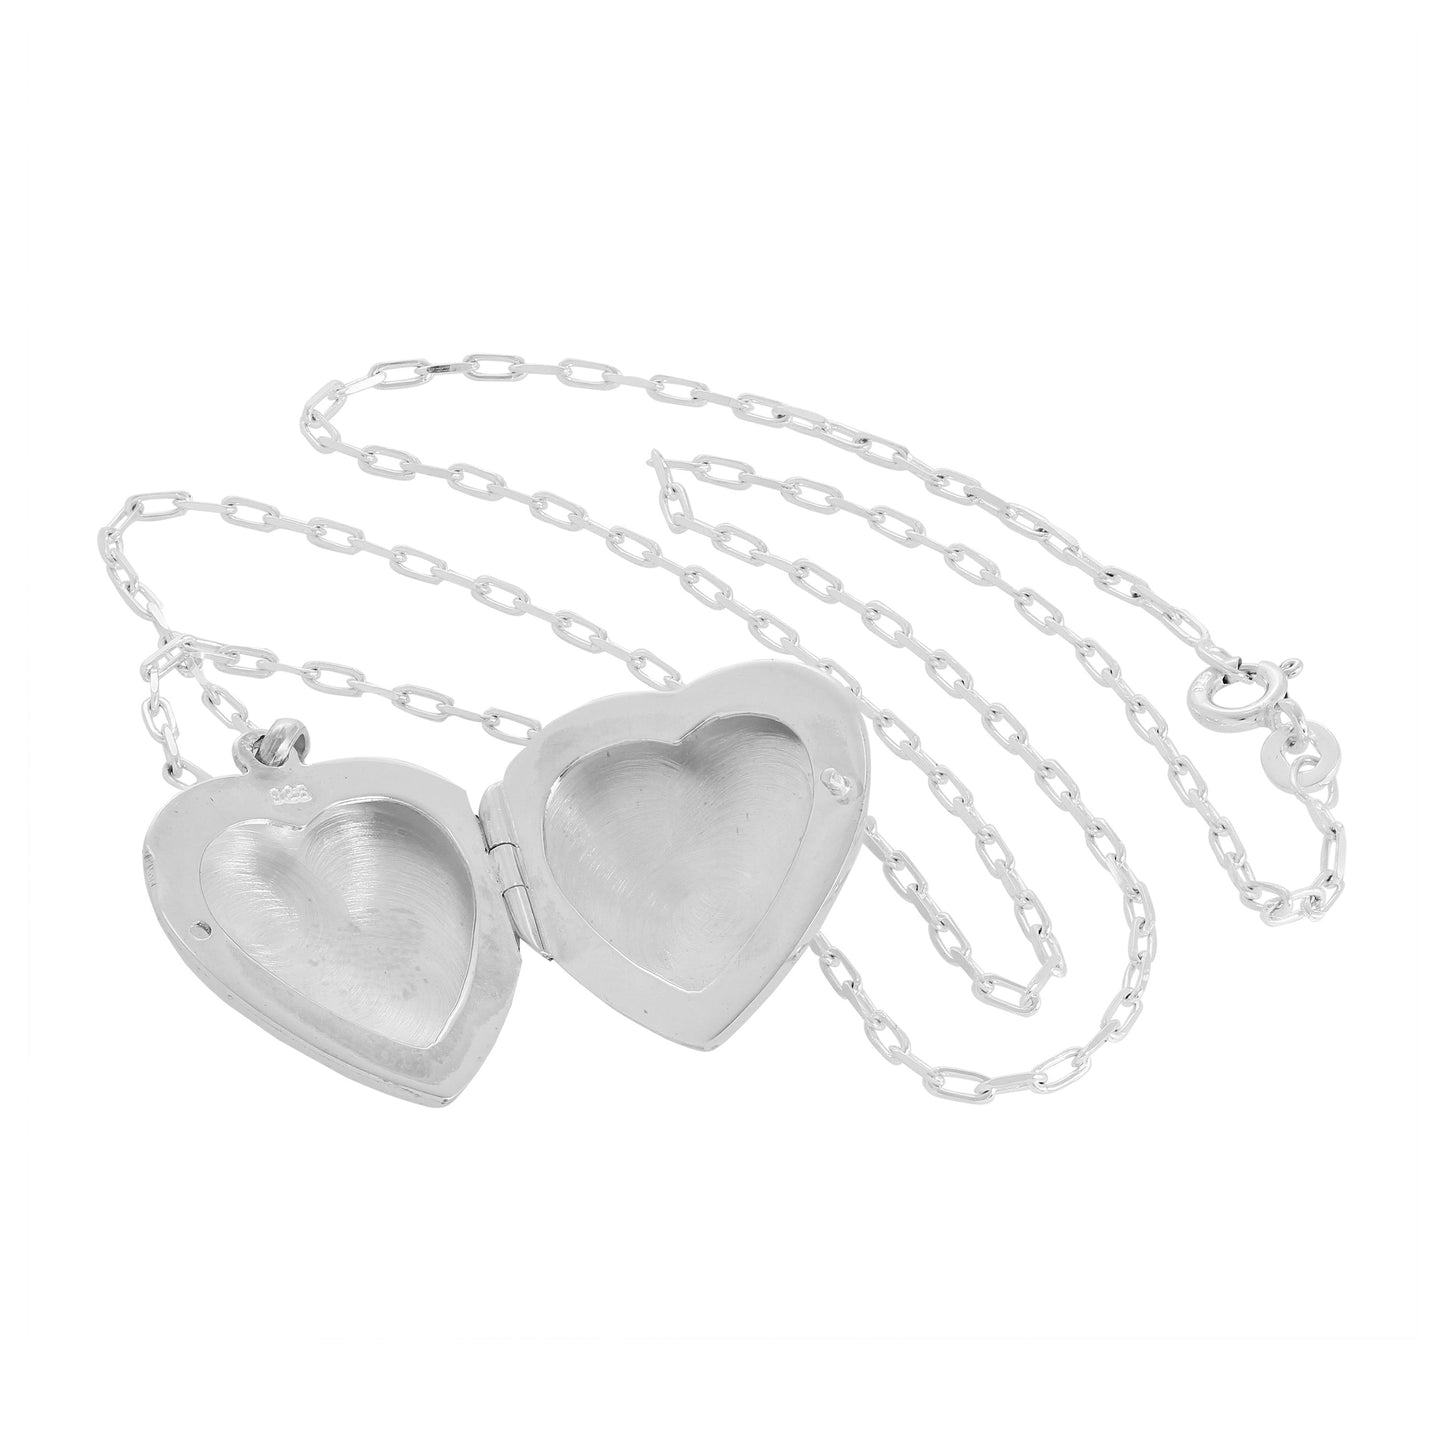 Sterling Silver Claddagh Heart Locket on Chain 16 - 24 Inches